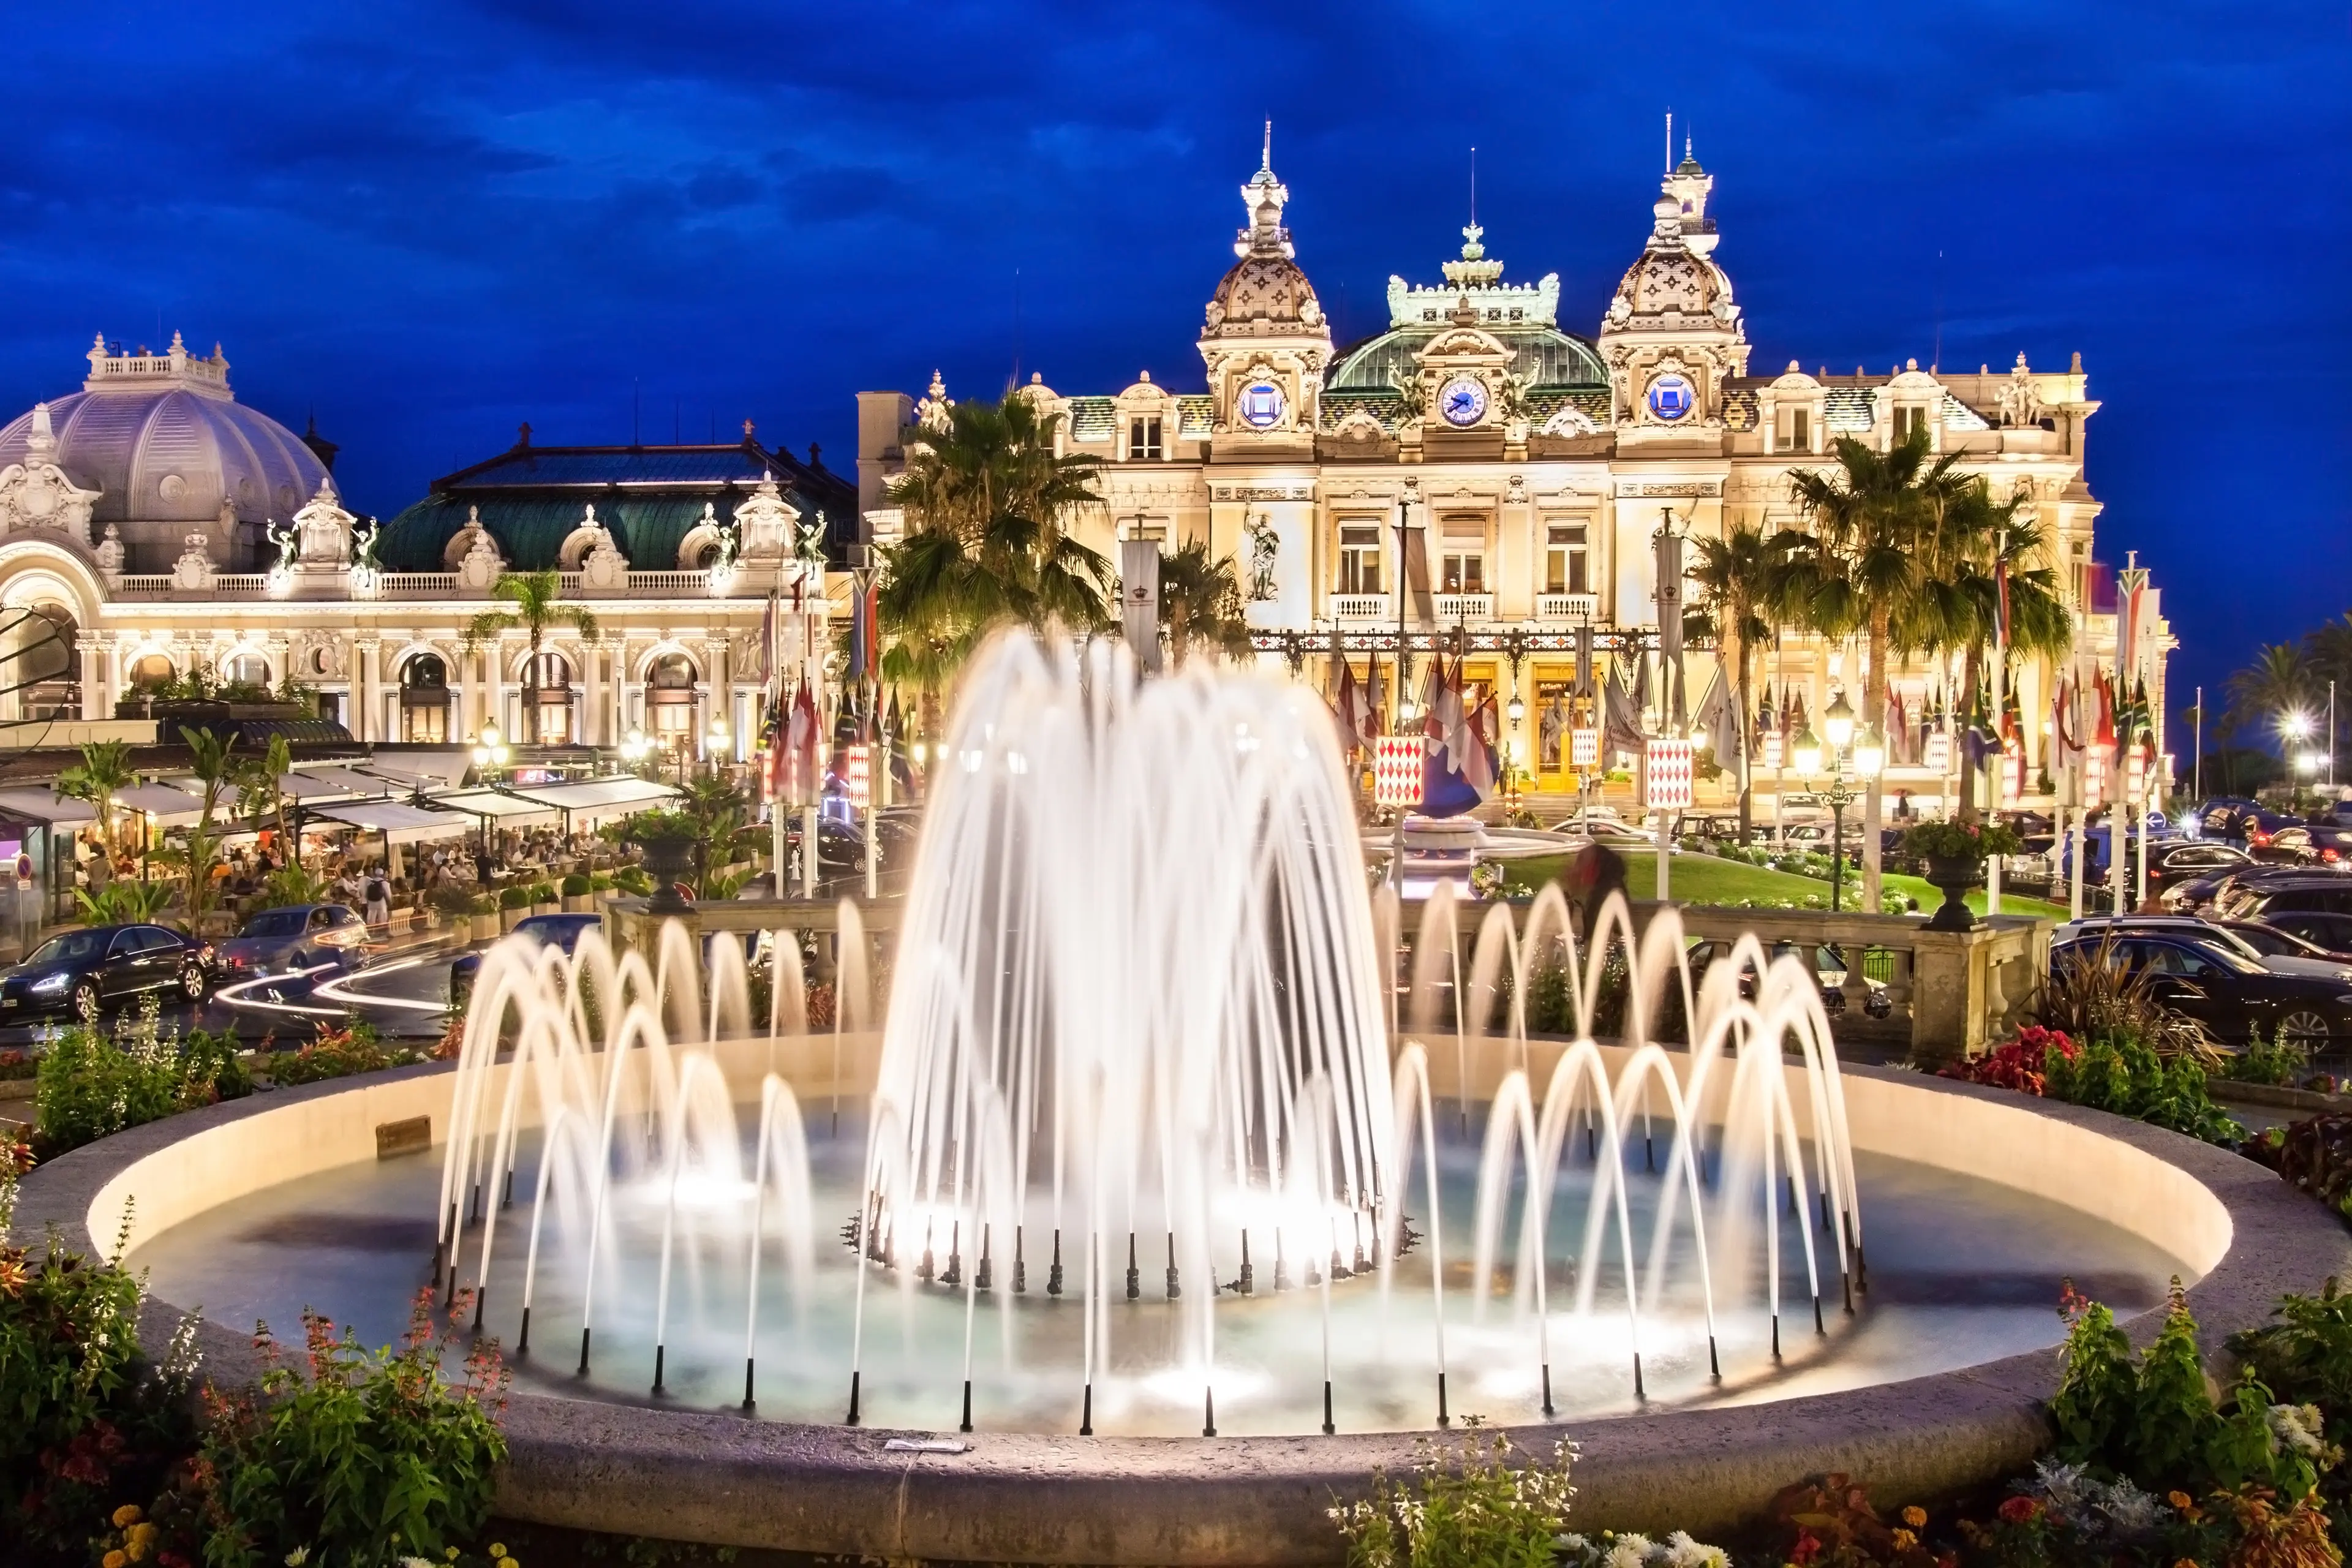 Explore Monaco in a Day: The Ultimate 24 Hour Itinerary